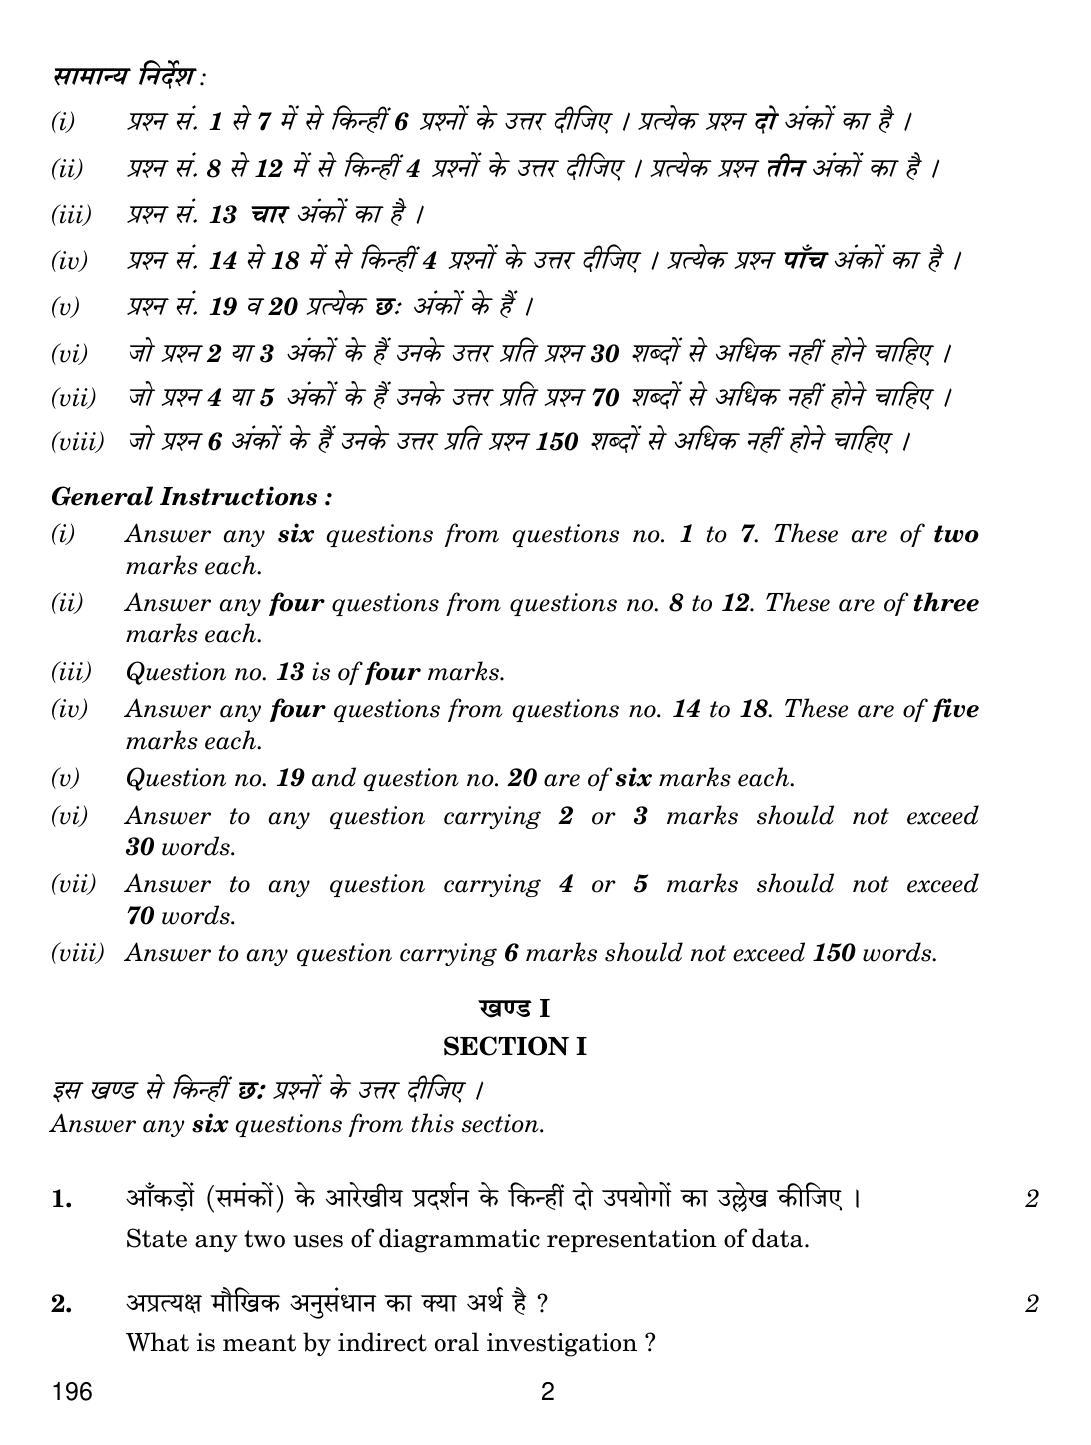 CBSE Class 12 196 OFFICE COMMUNICATION 2018 Question Paper - Page 2